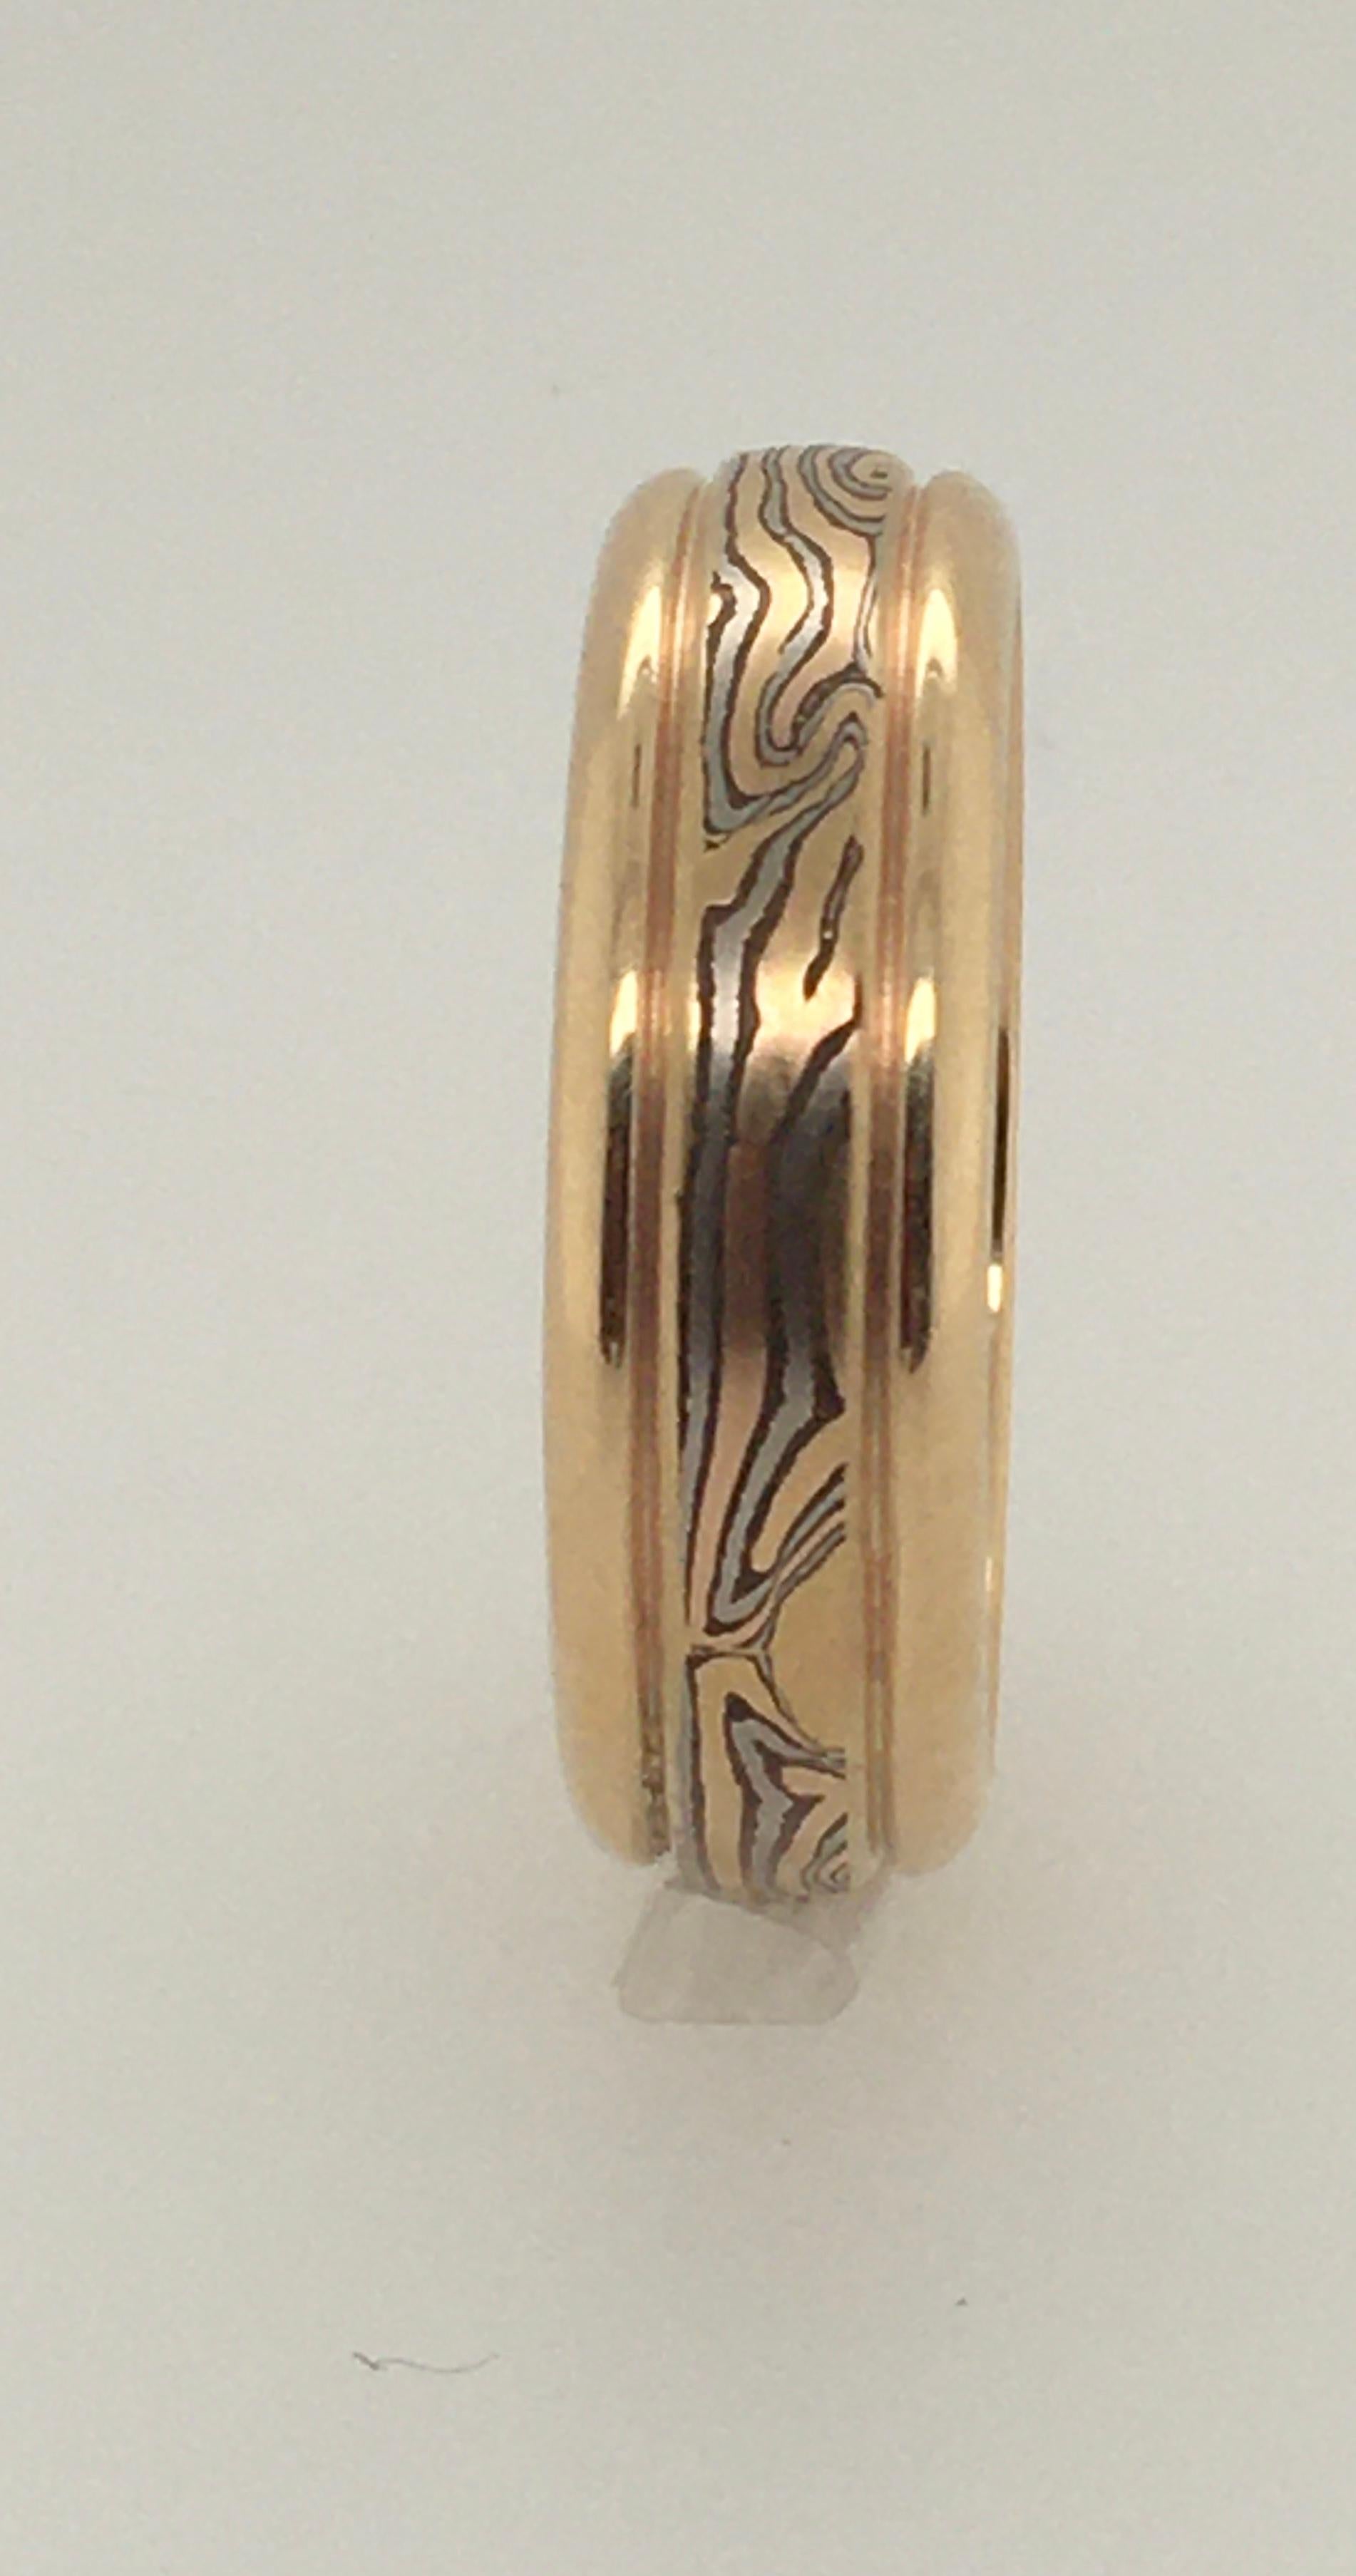 This dramatic George Sawyer round edge 6 mm Mokume wedding band features 14K red & gray gold with etched sterling silver.  Interior is stamped 